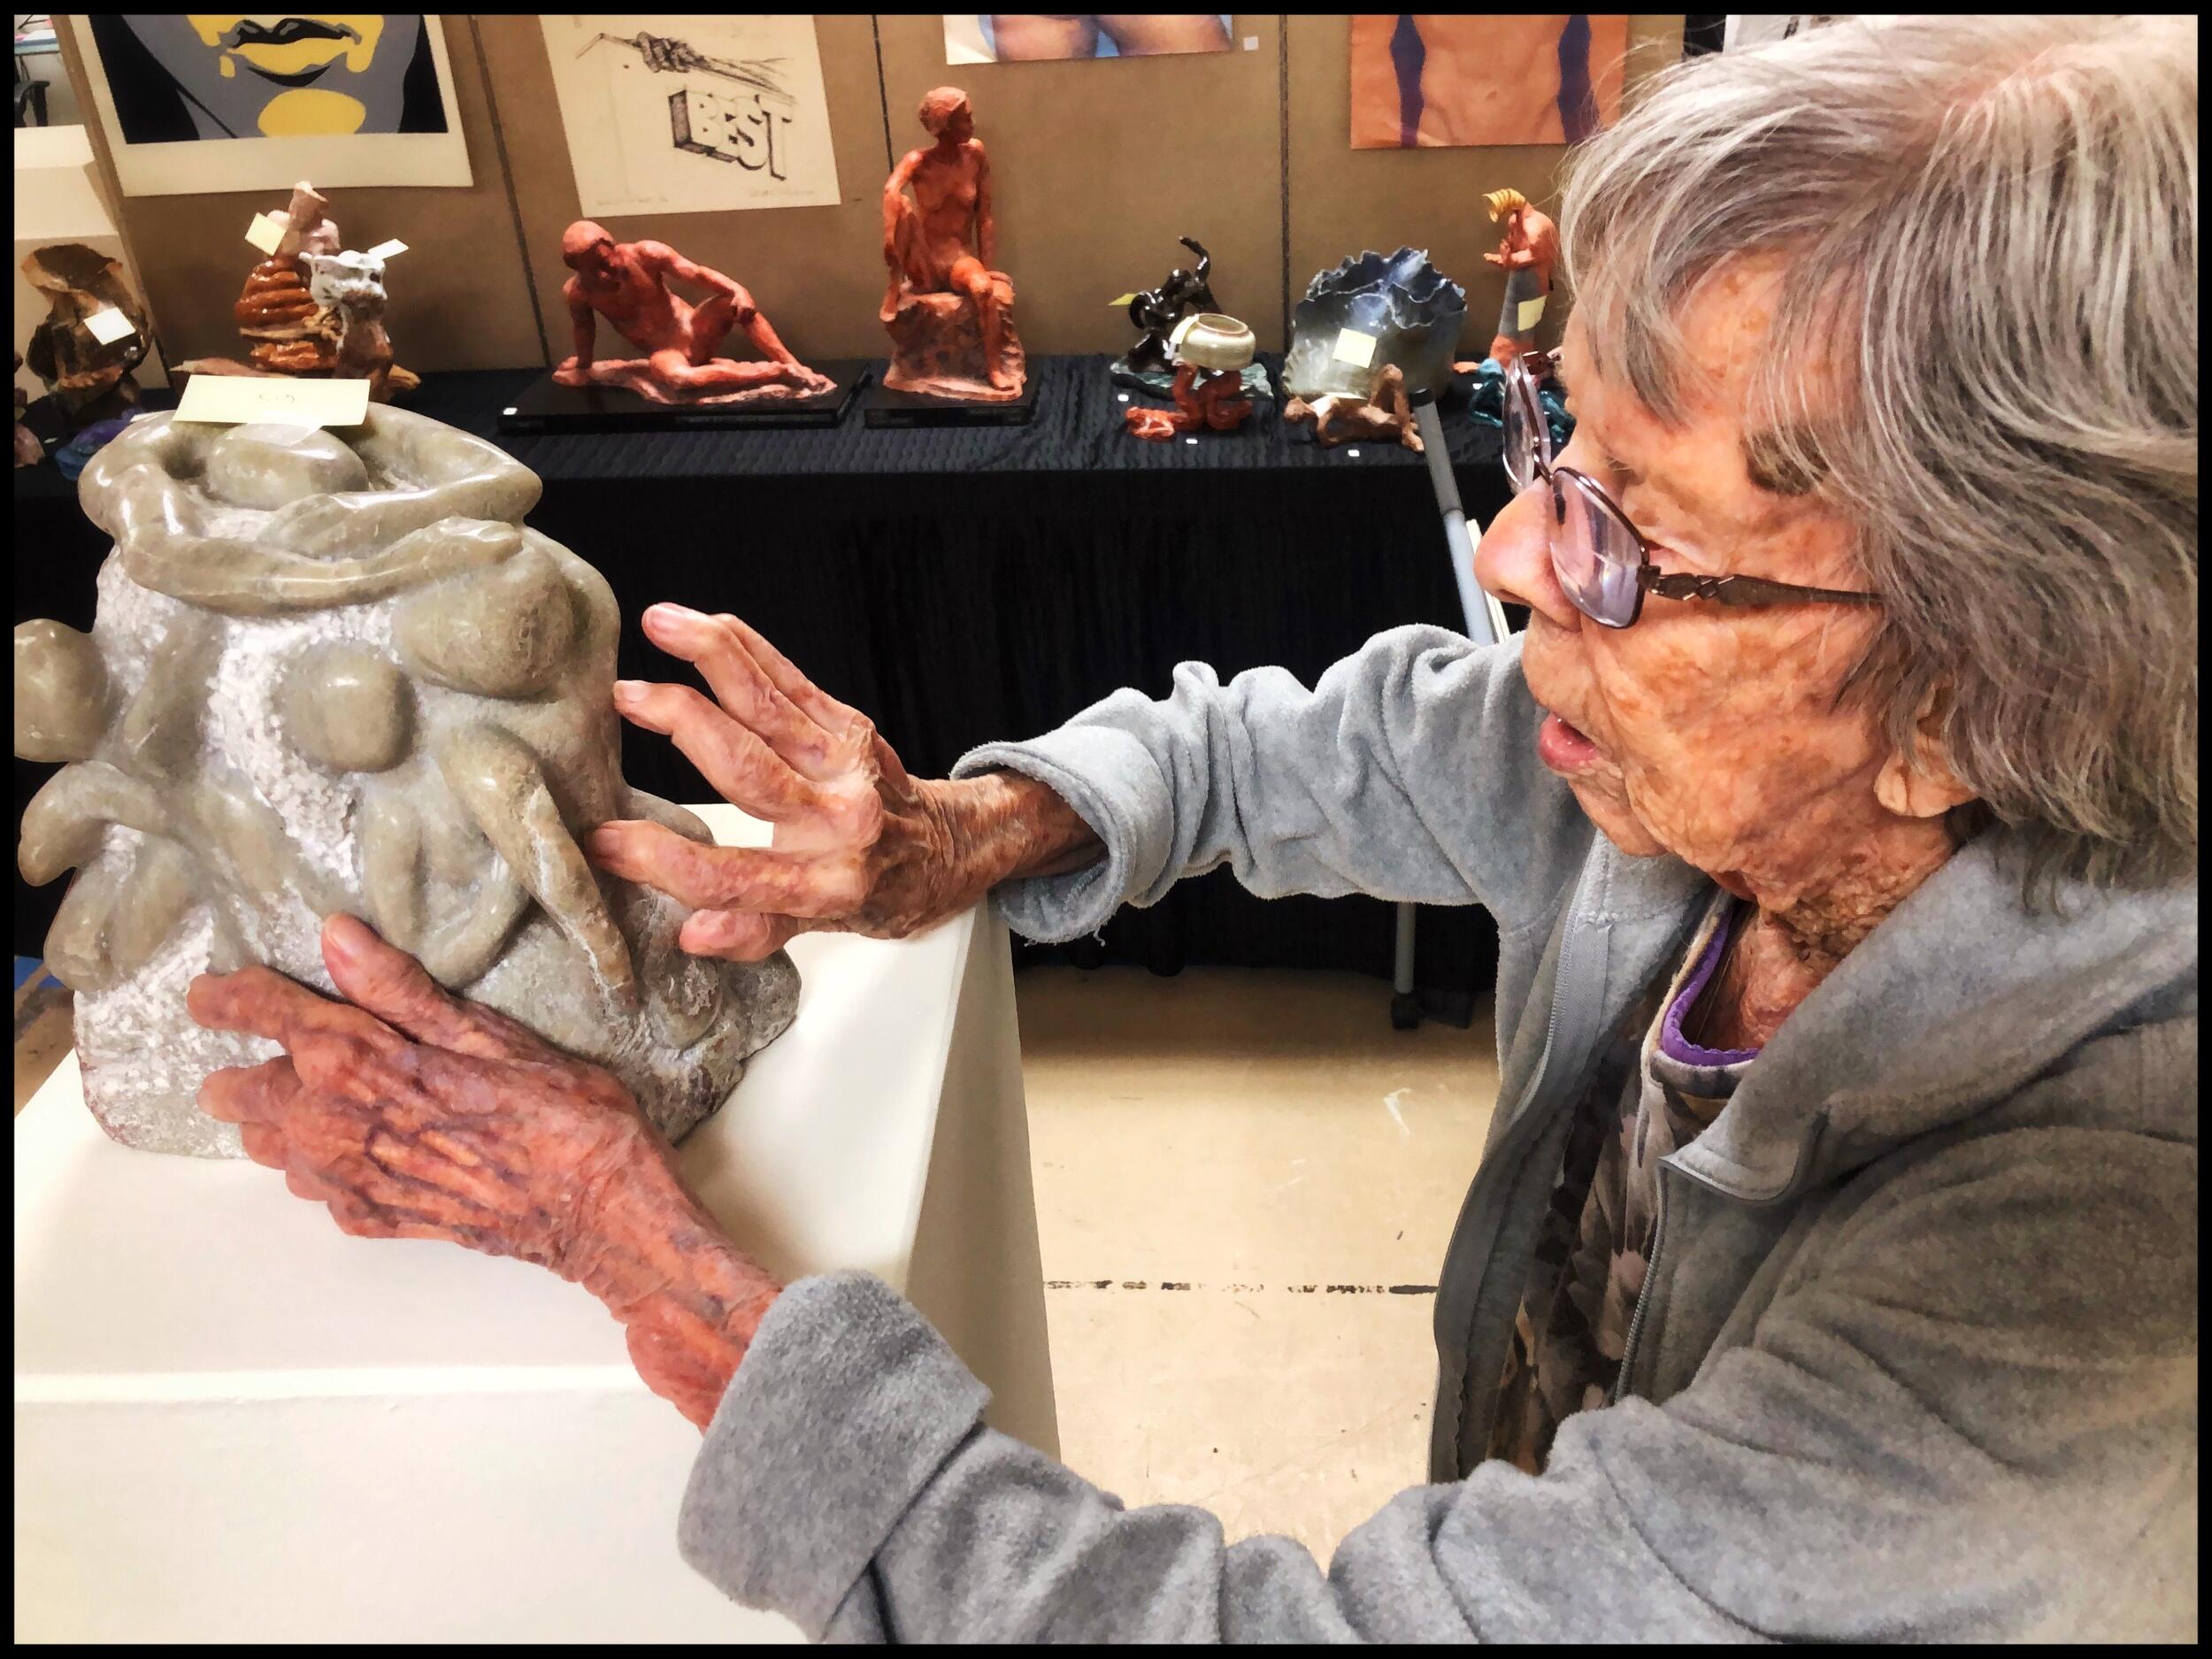 Frances Wessells at the show touching one of her stone sculptures